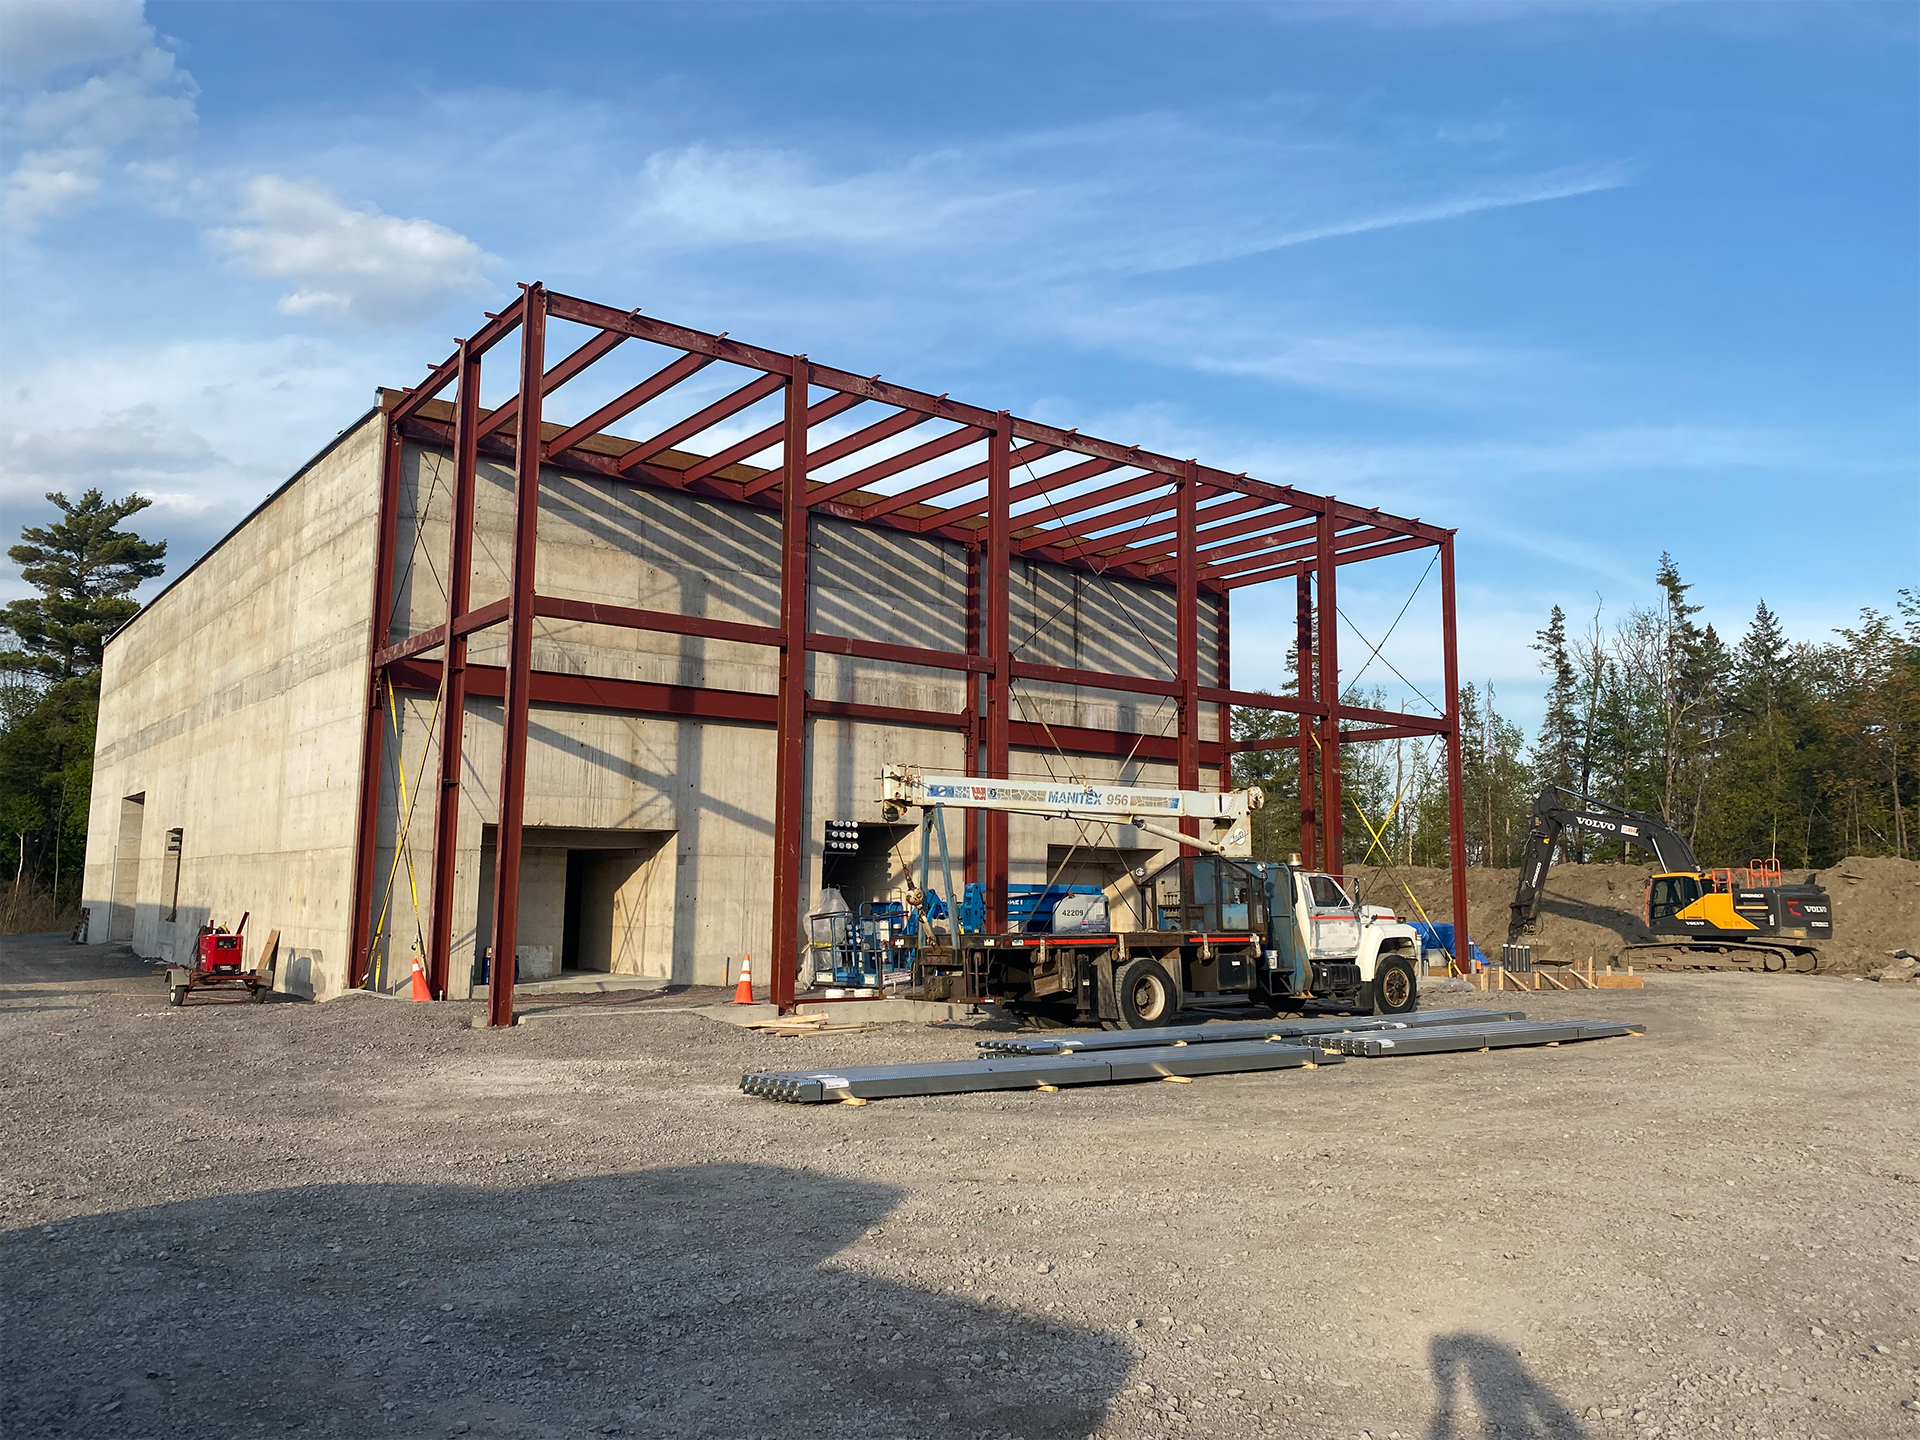 Construction site with a steel framework building under construction